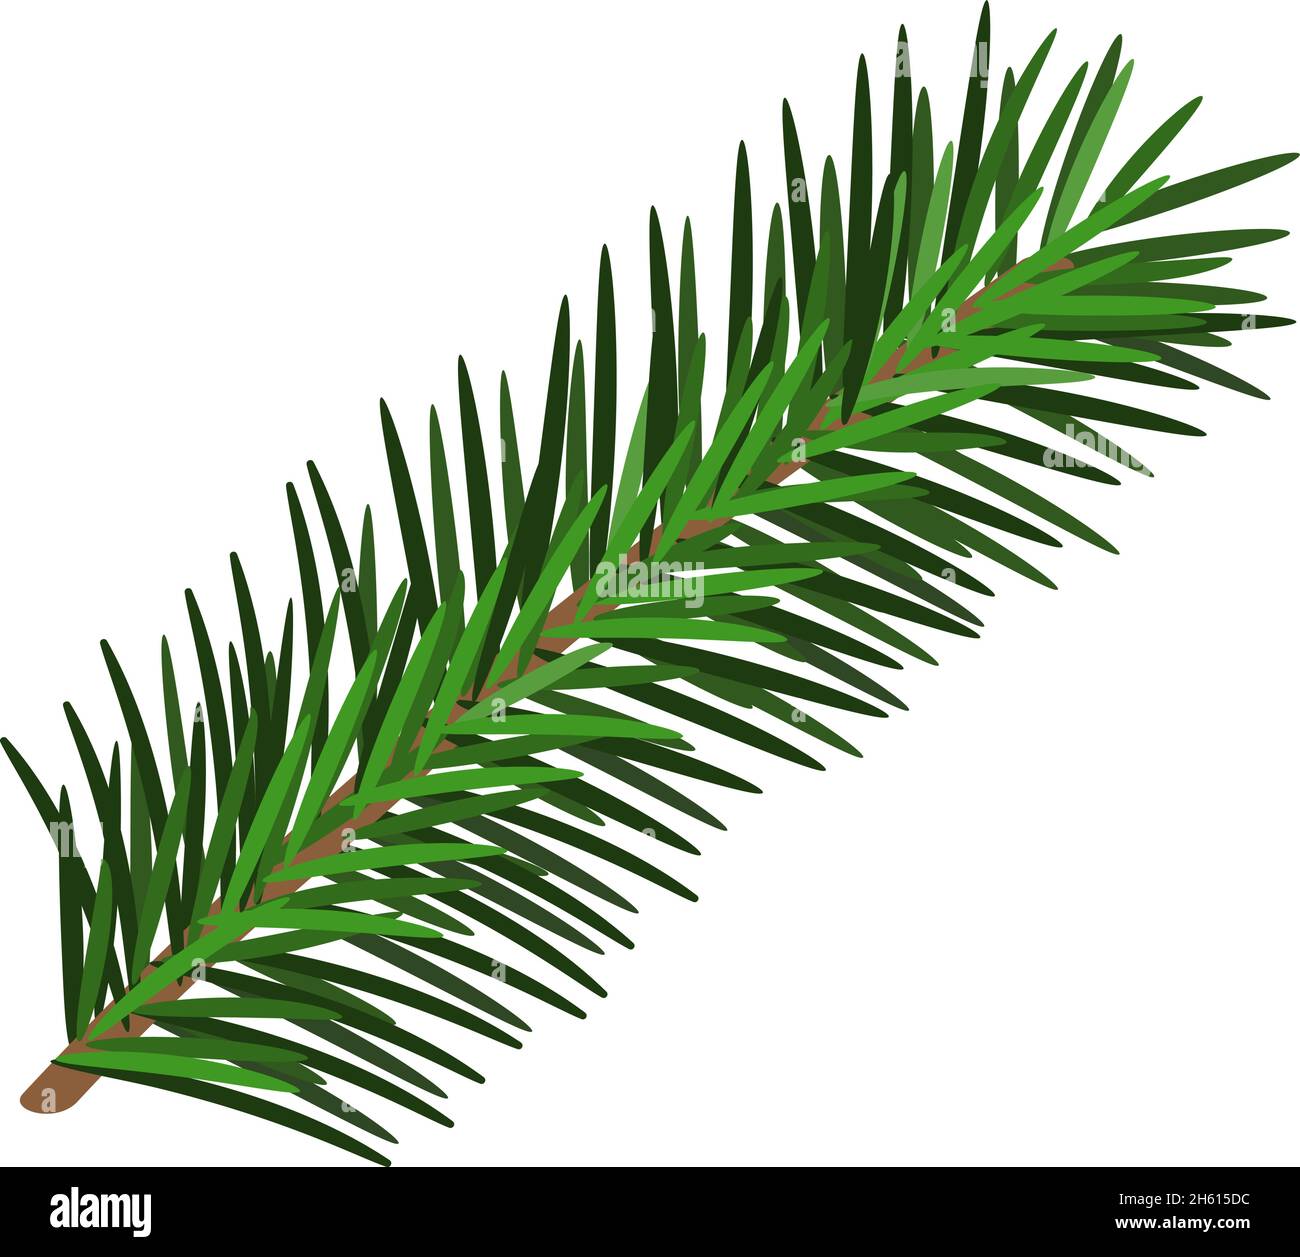 Hand drawn green lush spruce branch. Christmas tree element. Isolated on white vector illustration. Xmas decorative design item in retro style Stock Vector